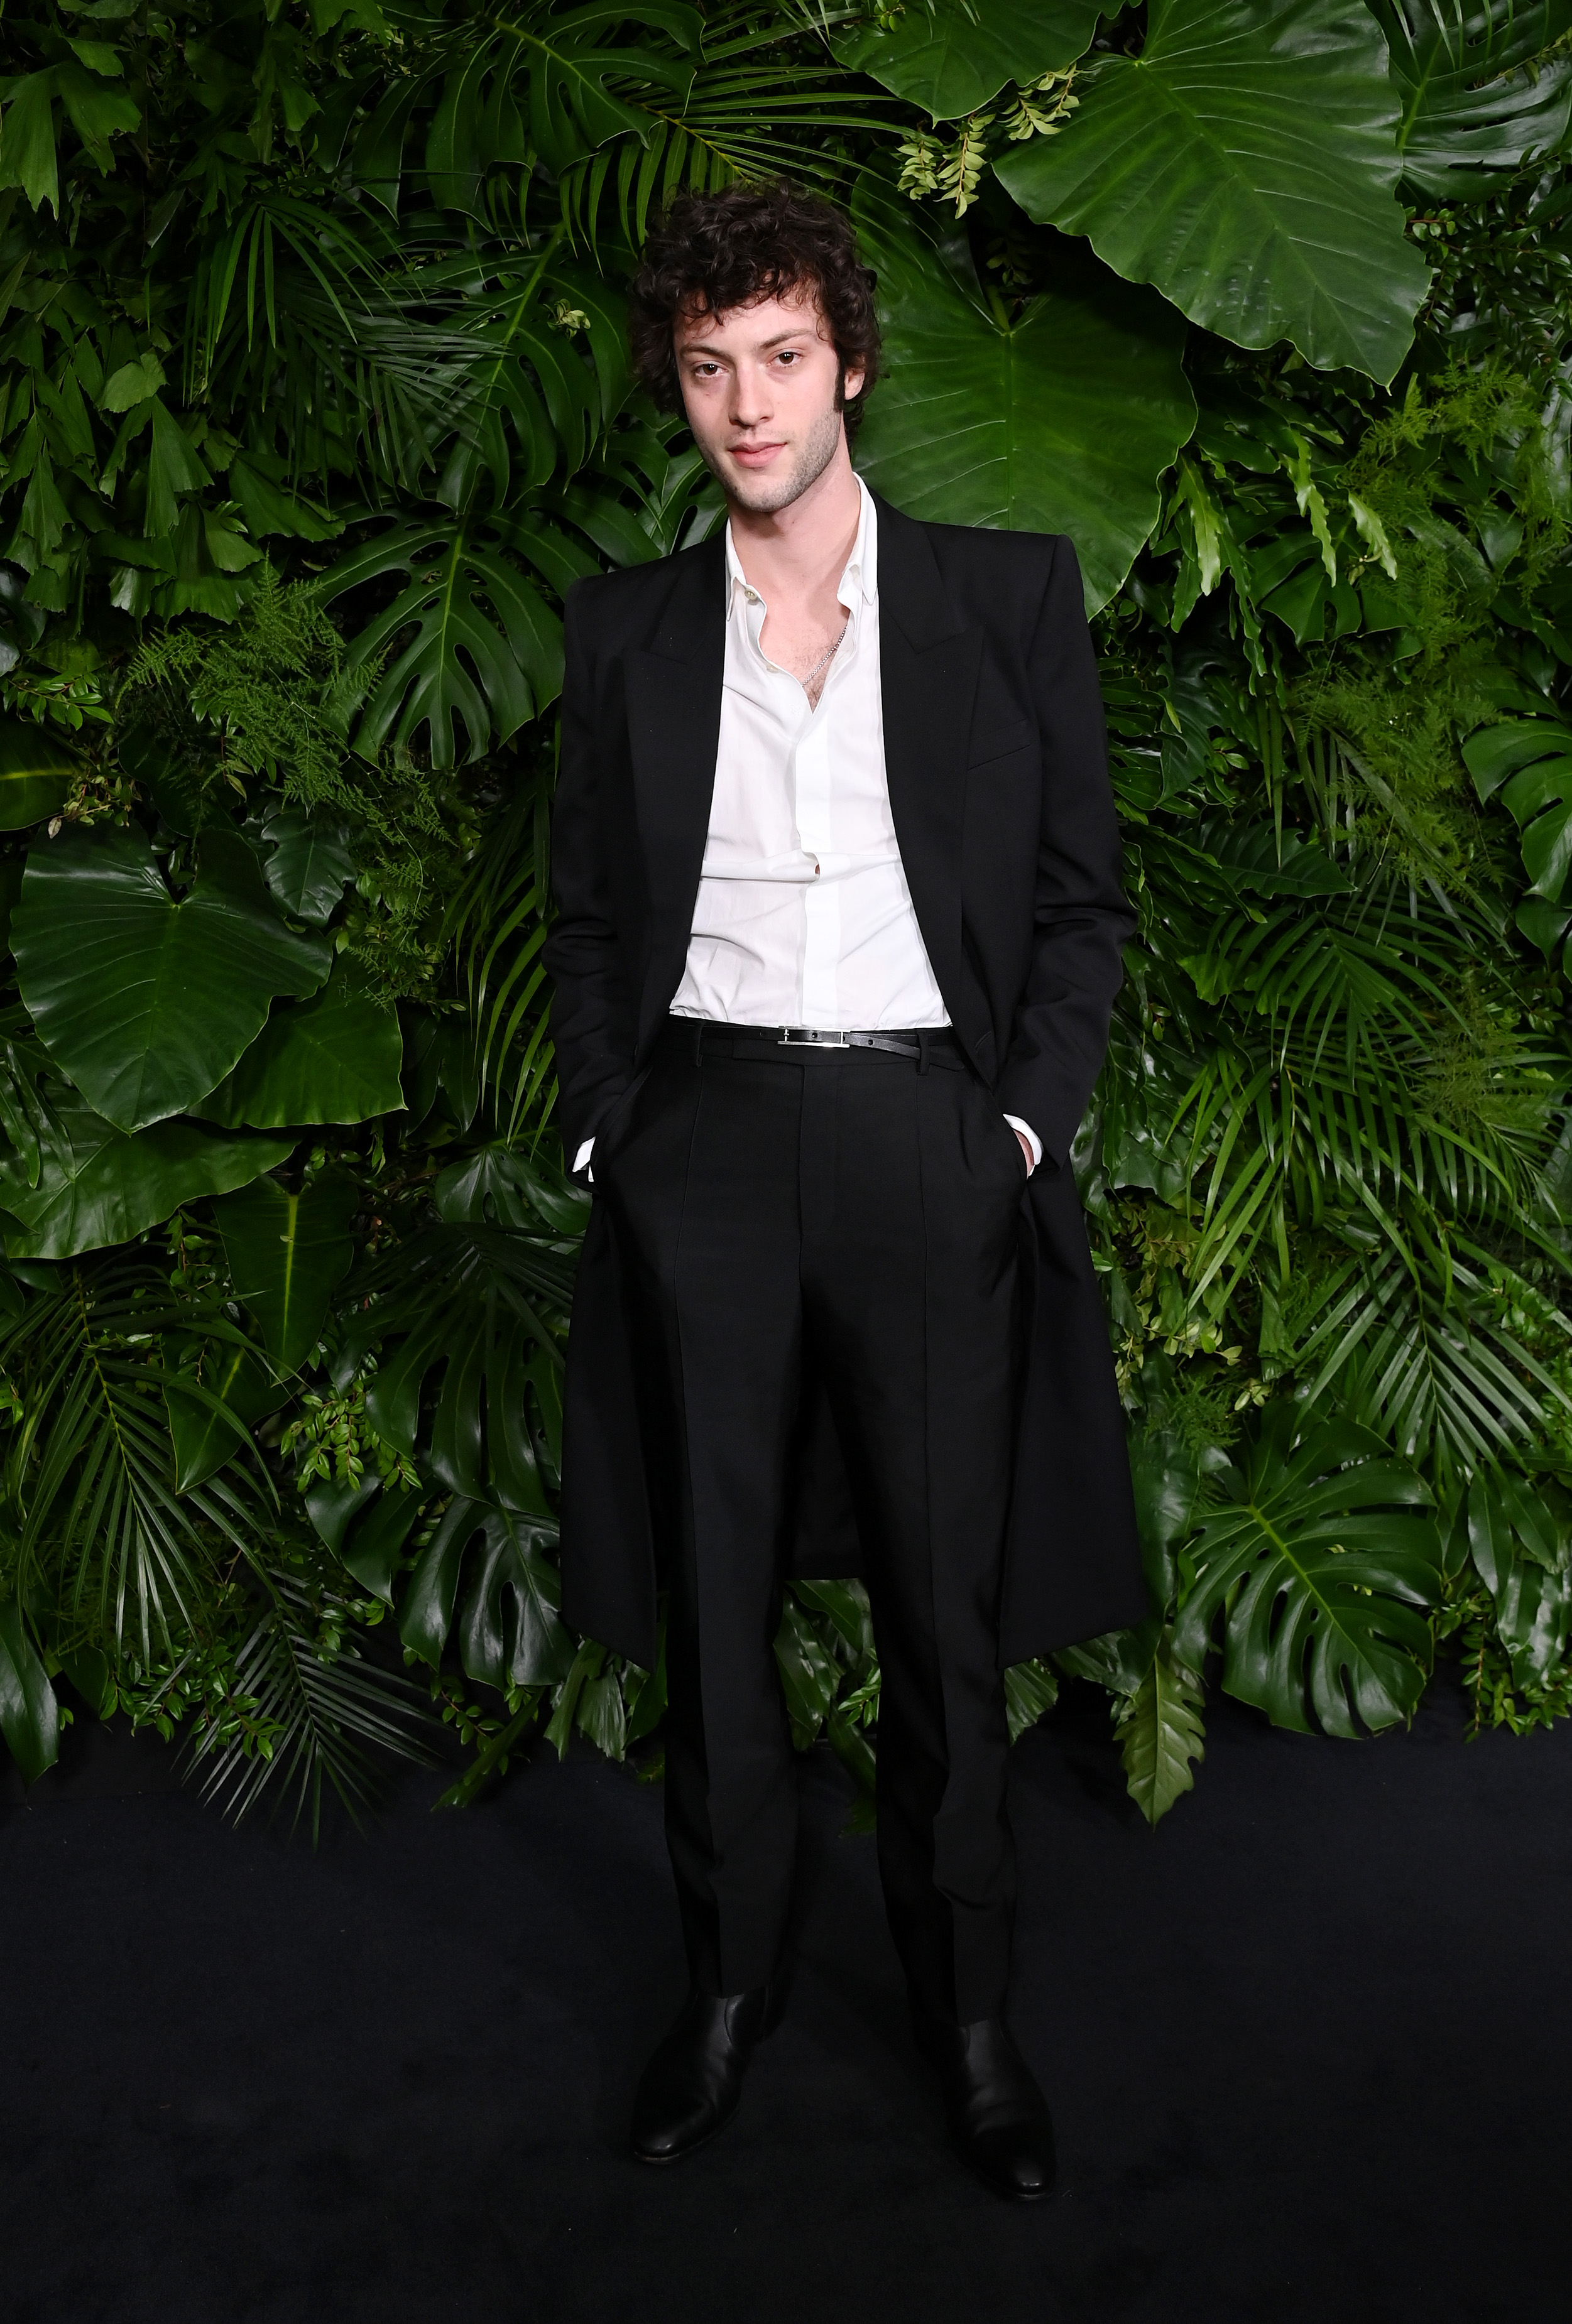 Dominic Sessa attends the Chanel and Charles Finch Annual Pre-Oscar Dinner at The Polo Lounge at The Beverly Hills Hotel on March 9, 2024, in Beverly Hills, California